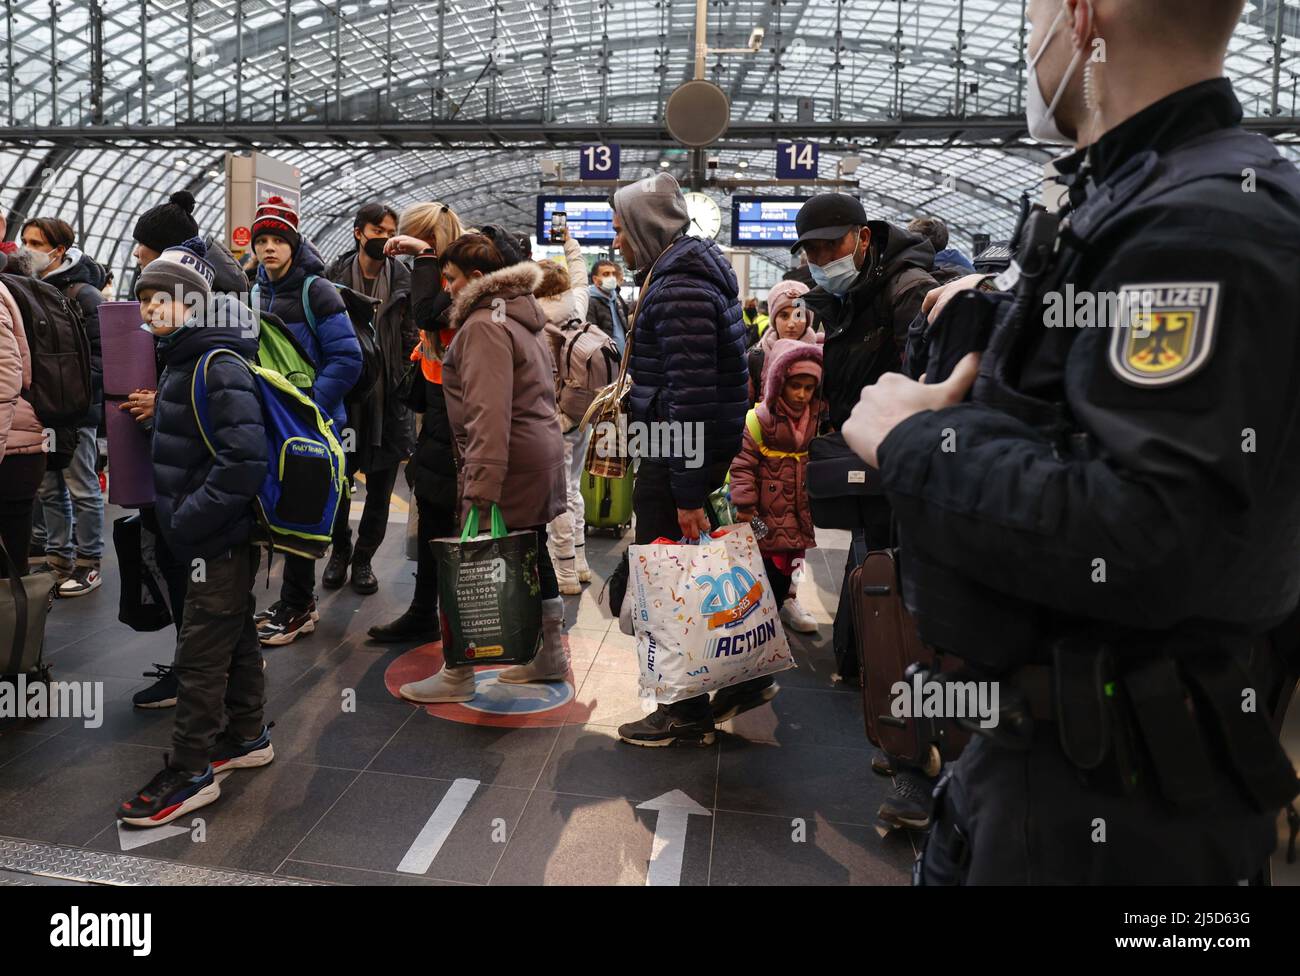 Berlin, 03.03.2022 - Refugees from Ukraine arrive with their children at Berlin Central Station. Volunteers help the refugees. Thousands of refugees from Ukraine have already arrived in Germany. [automated translation] Stock Photo